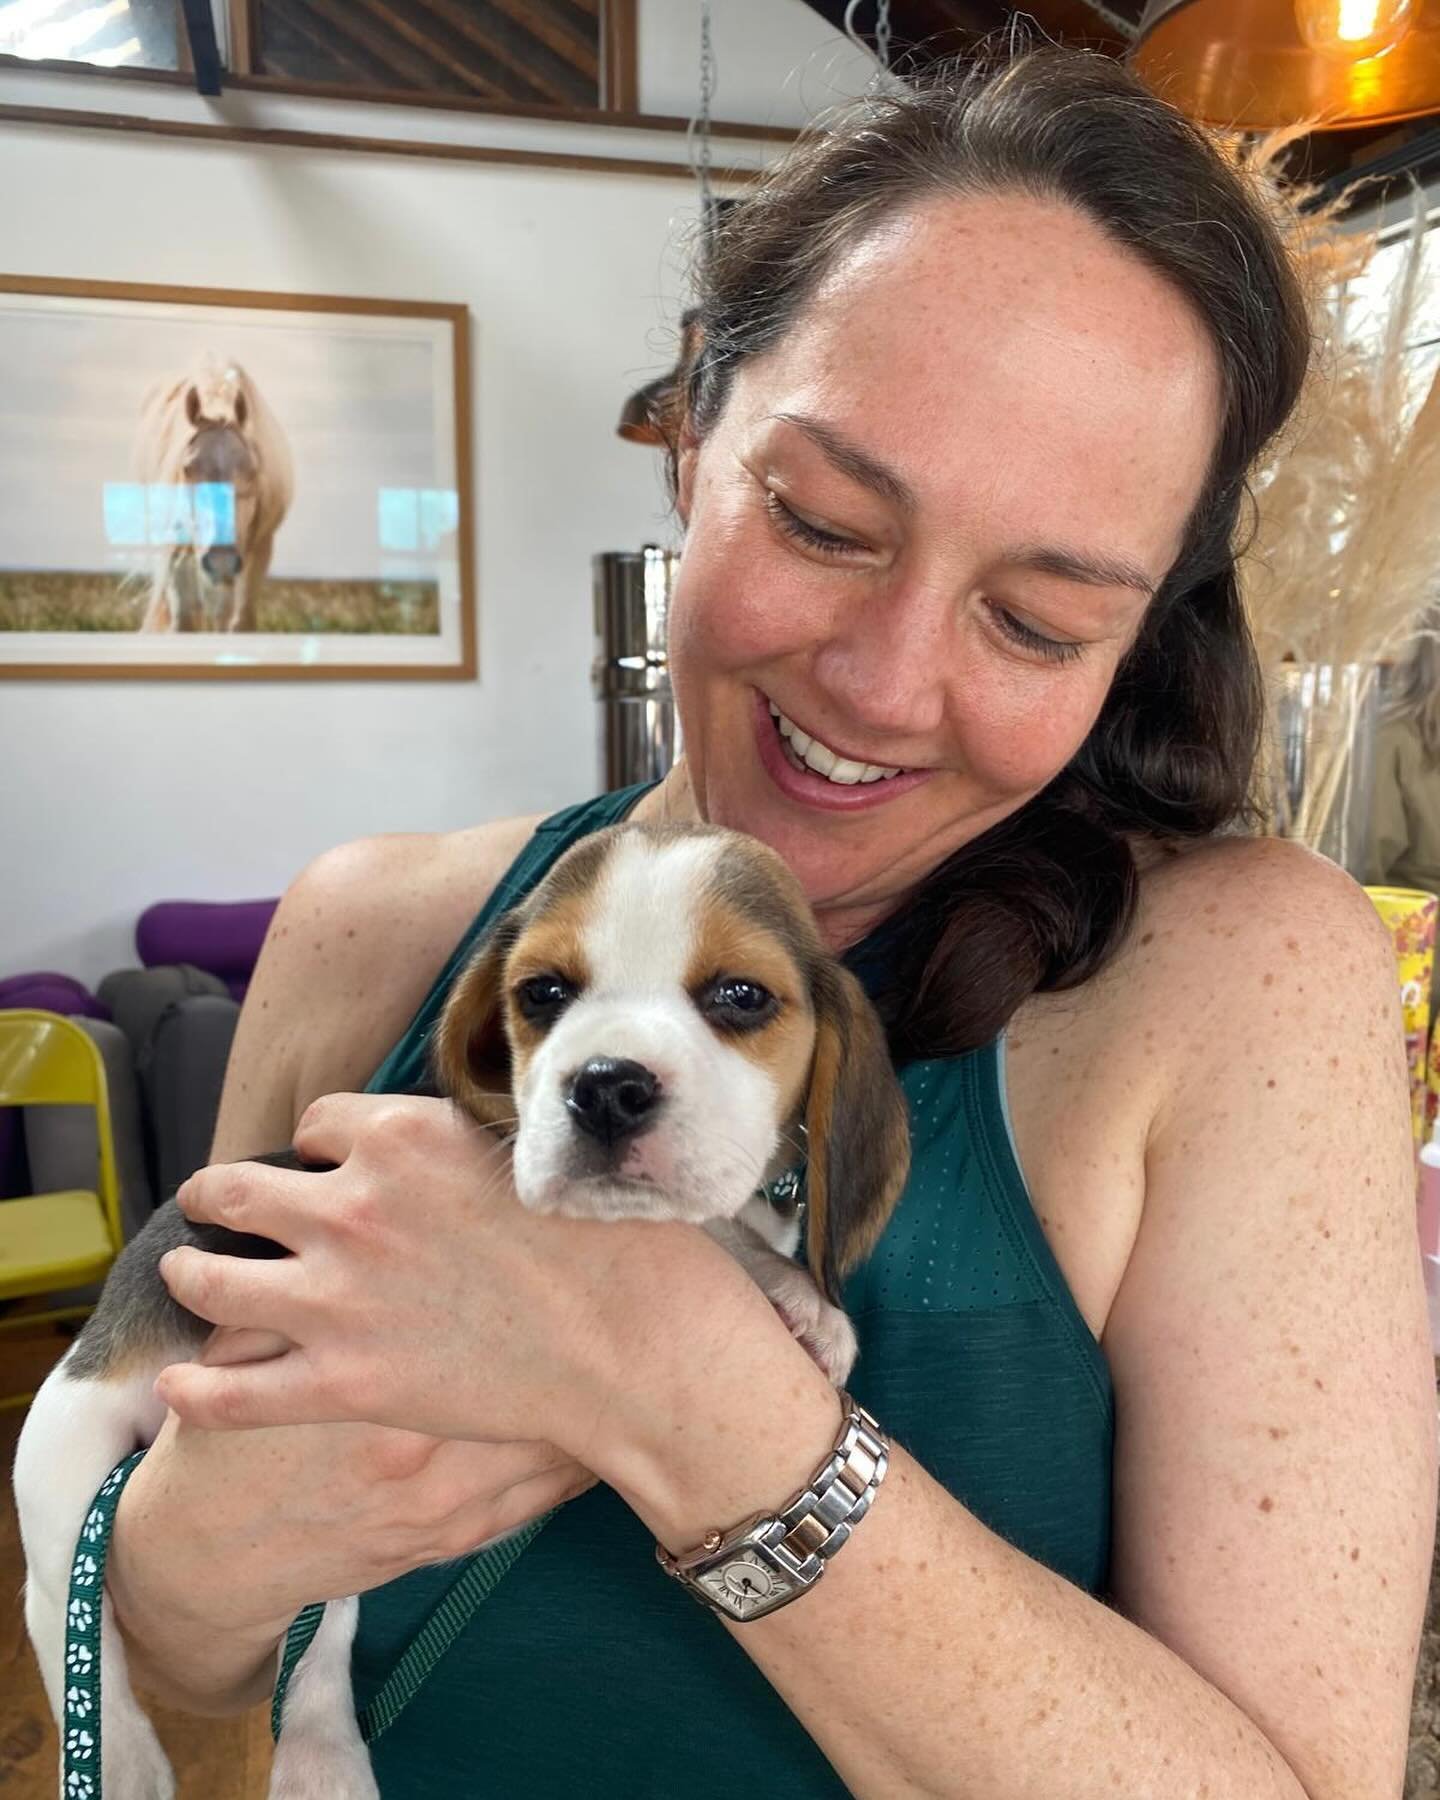 What a treat! Got to meet and have a cuddle with this handsome chap between yoga classes at Yard Yoga this morning. 

@daphneh_c &lsquo;s new puppy - Pippin! 

Perfect start to the day! 

Happy Easter and Holidays to all celebrating this weekend. 

#